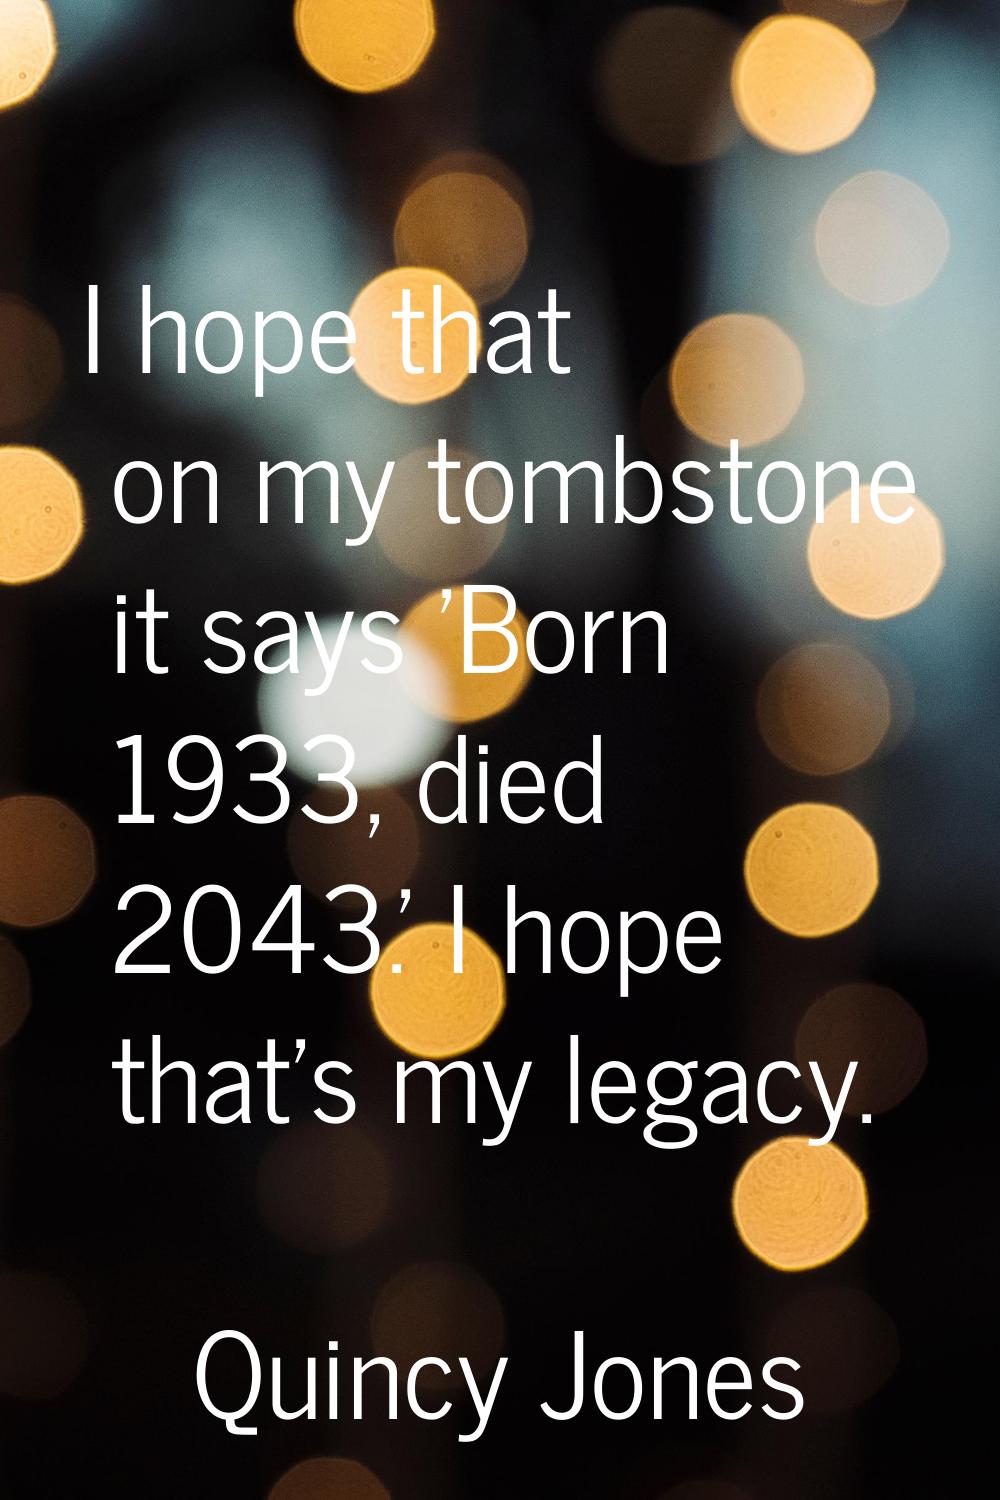 I hope that on my tombstone it says 'Born 1933, died 2043.' I hope that's my legacy.